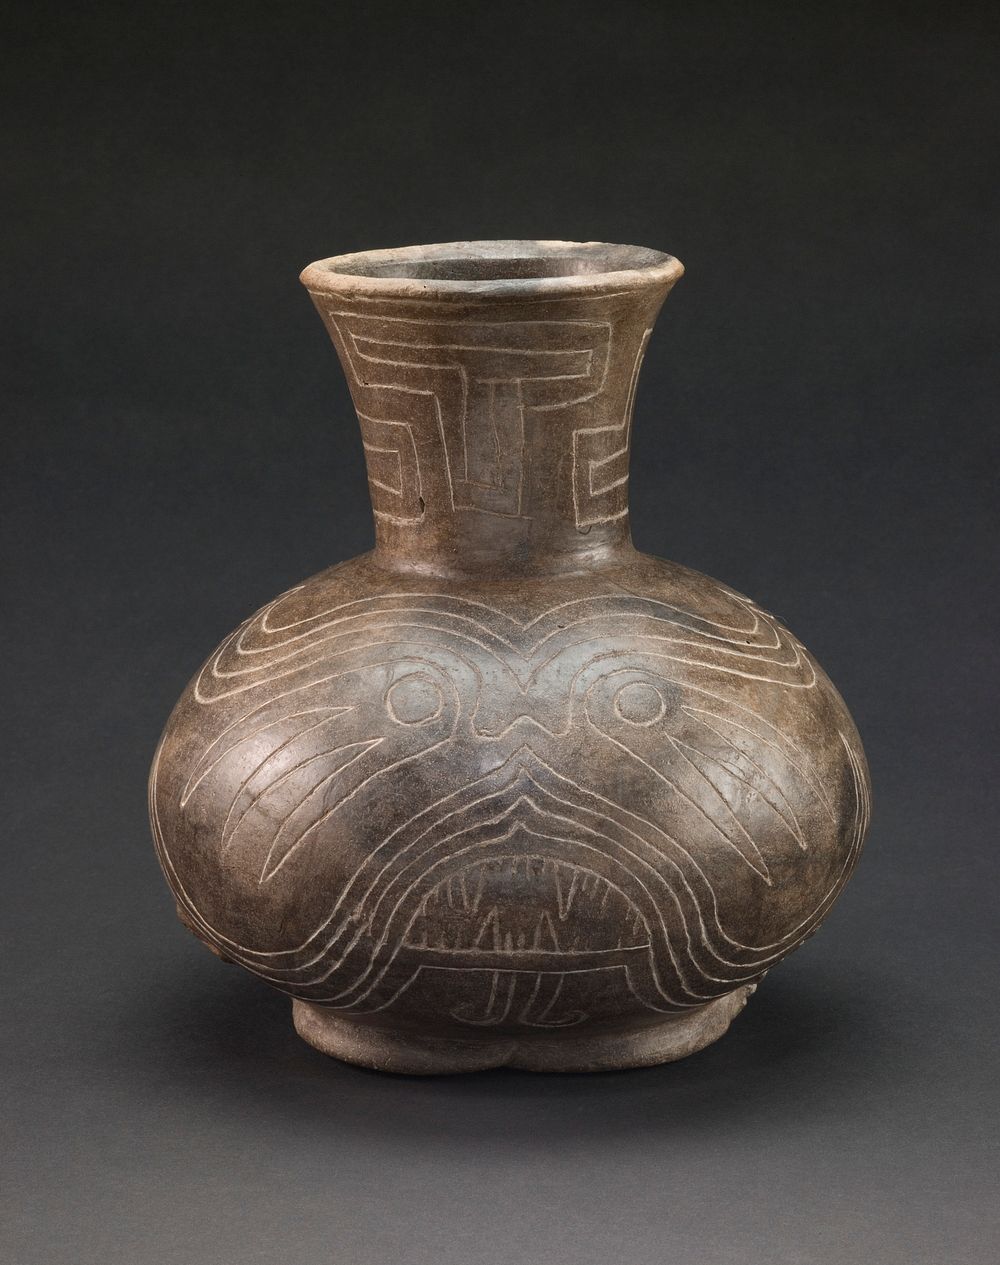 Vessel with Incised Motifs